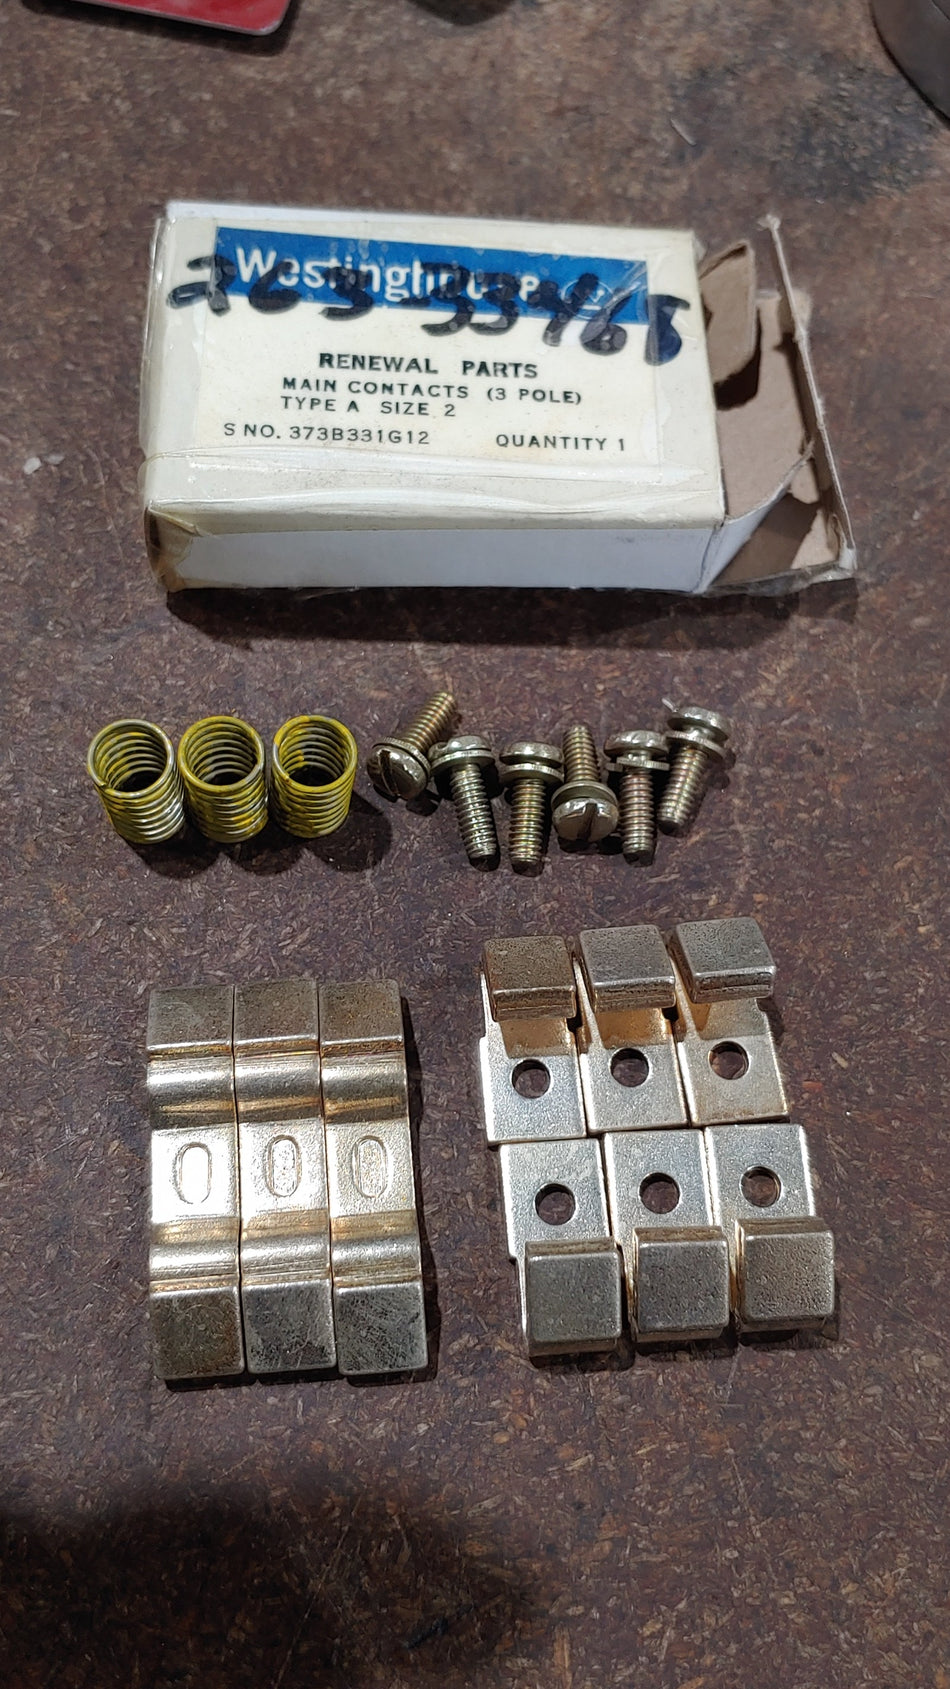 WESTINGHOUSE 373B331G12 MAIN CONTACT KIT 3 POLE TYPE: A SIZE: 2